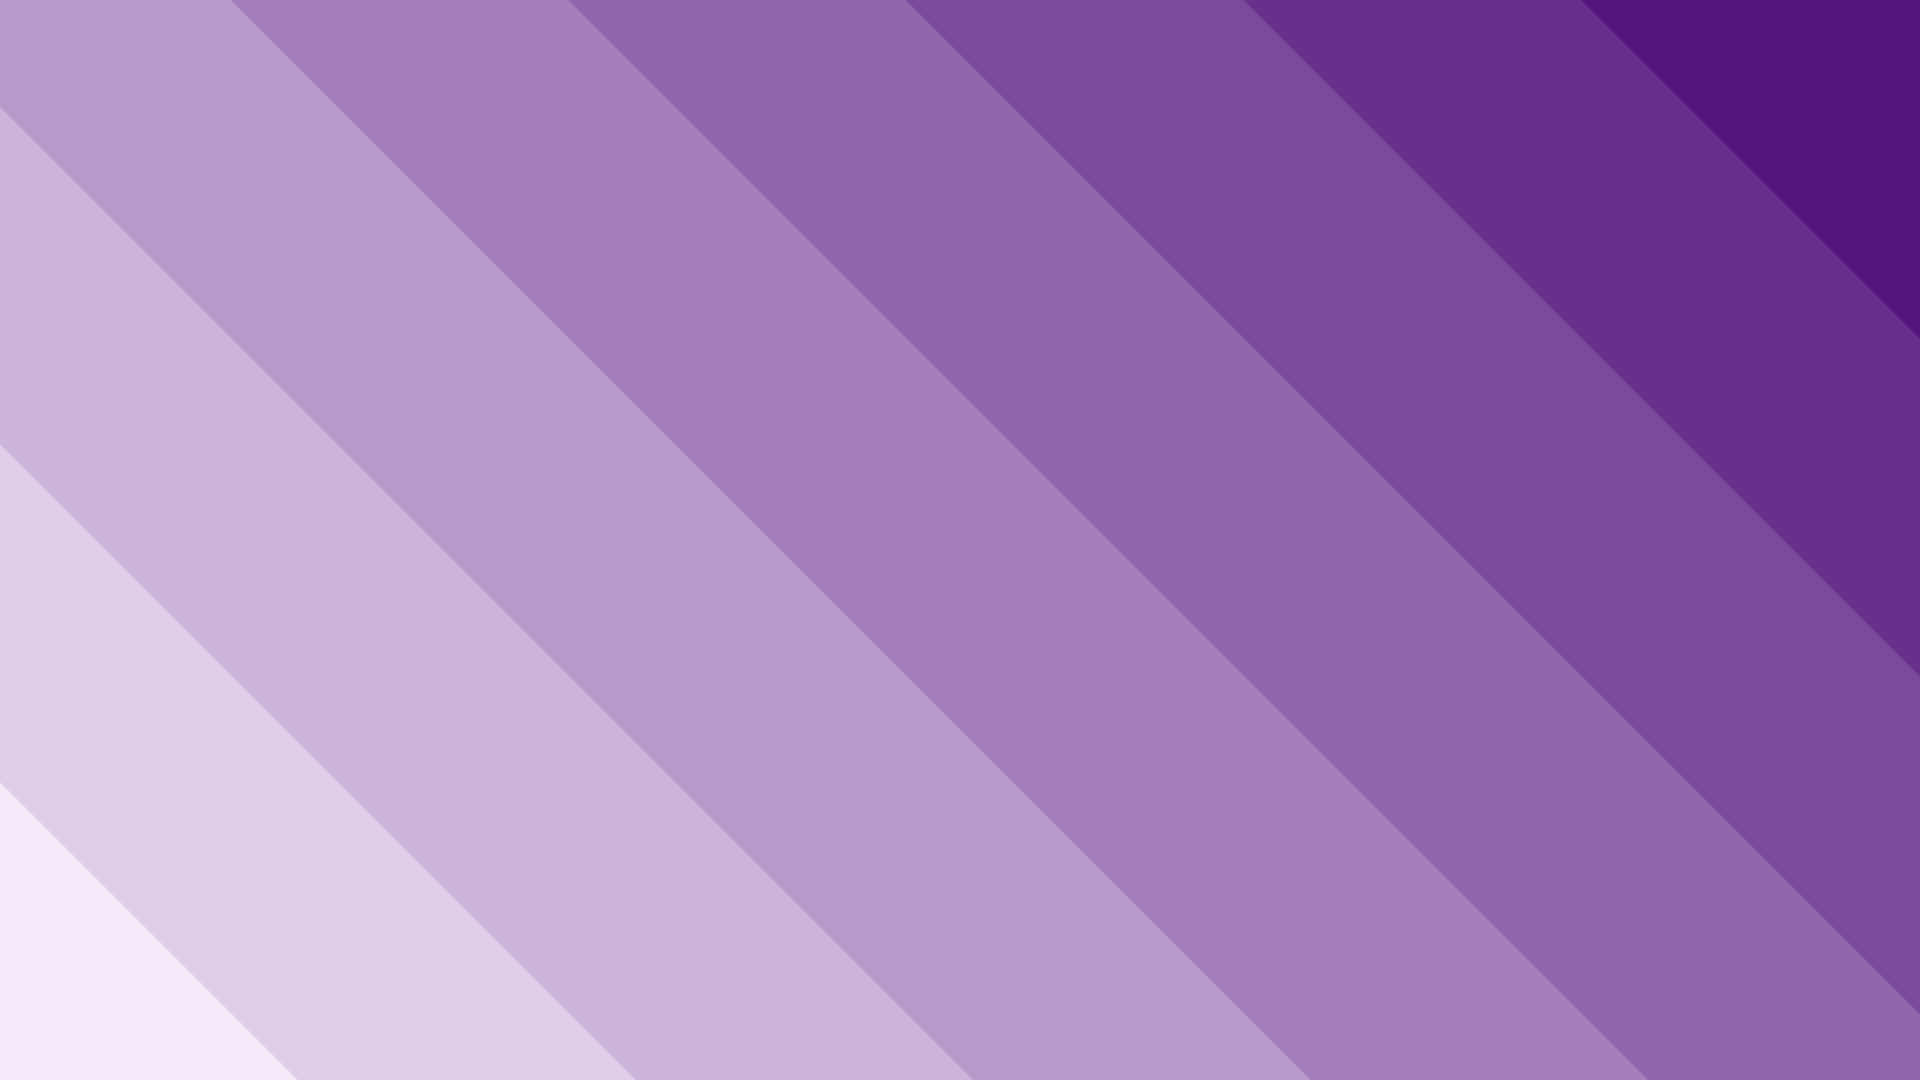 A Purple And White Striped Background